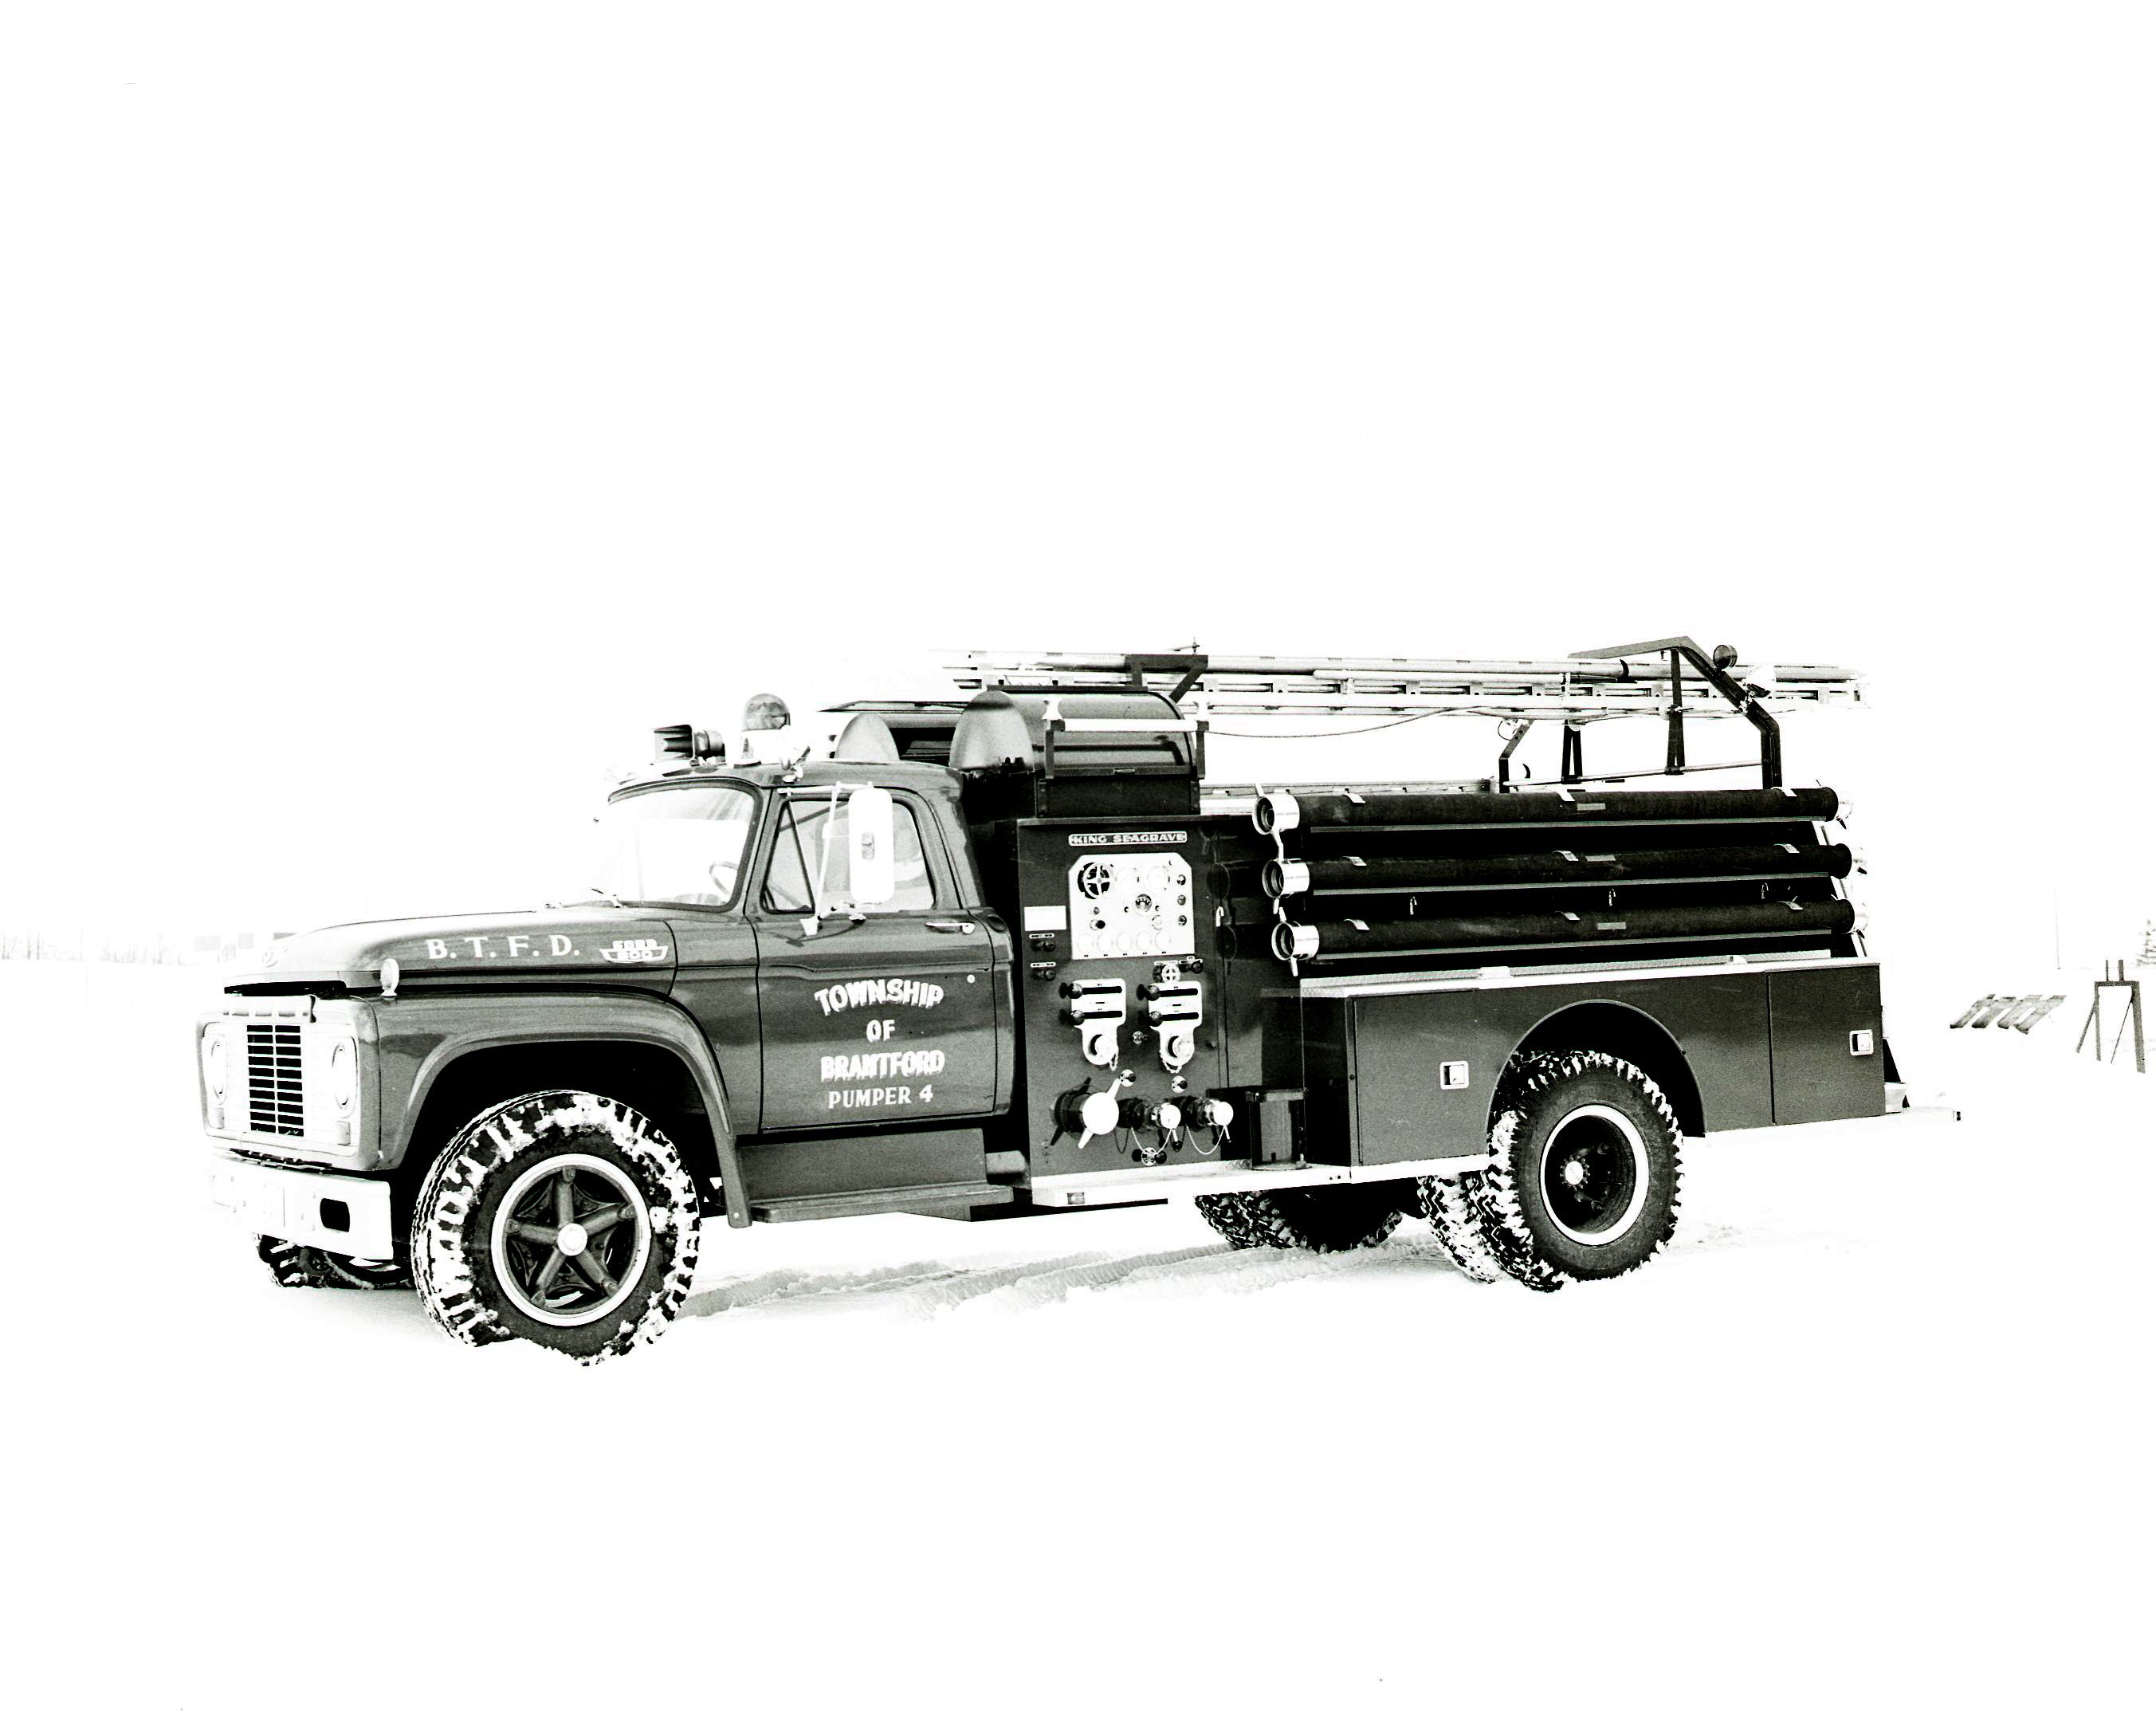 King-Seagrave delivery photo of serial 64143, a 1964 Ford pumper of the Brantford Township Fire Department in Ontario.